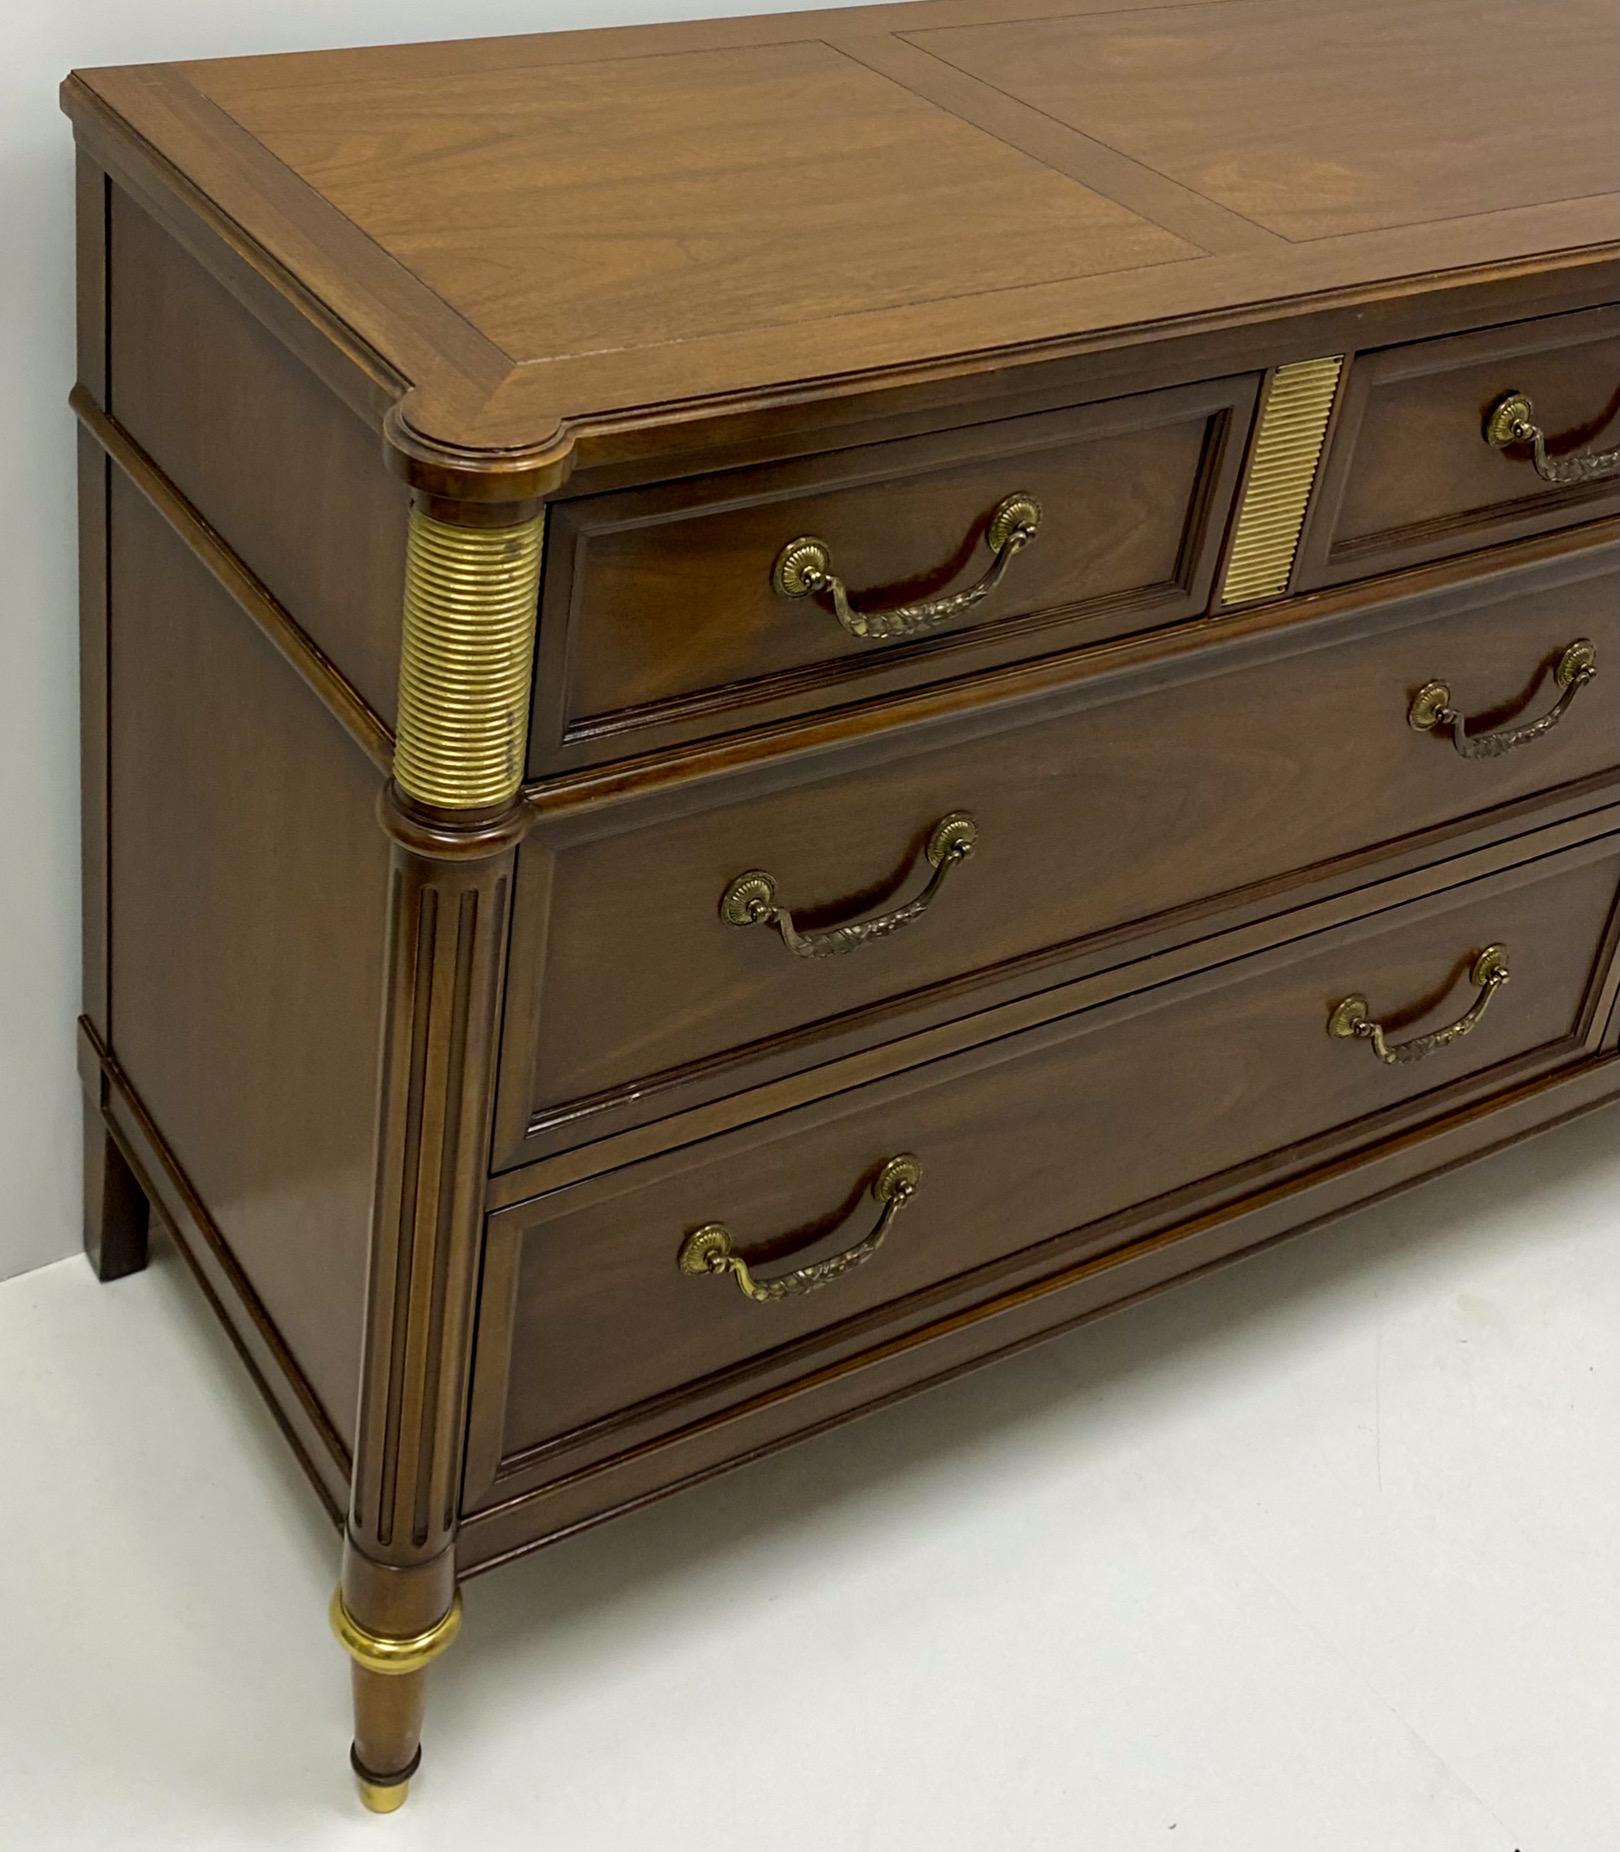 American Louis XVI Style Mahogany Commode or Chest by Baker Furniture